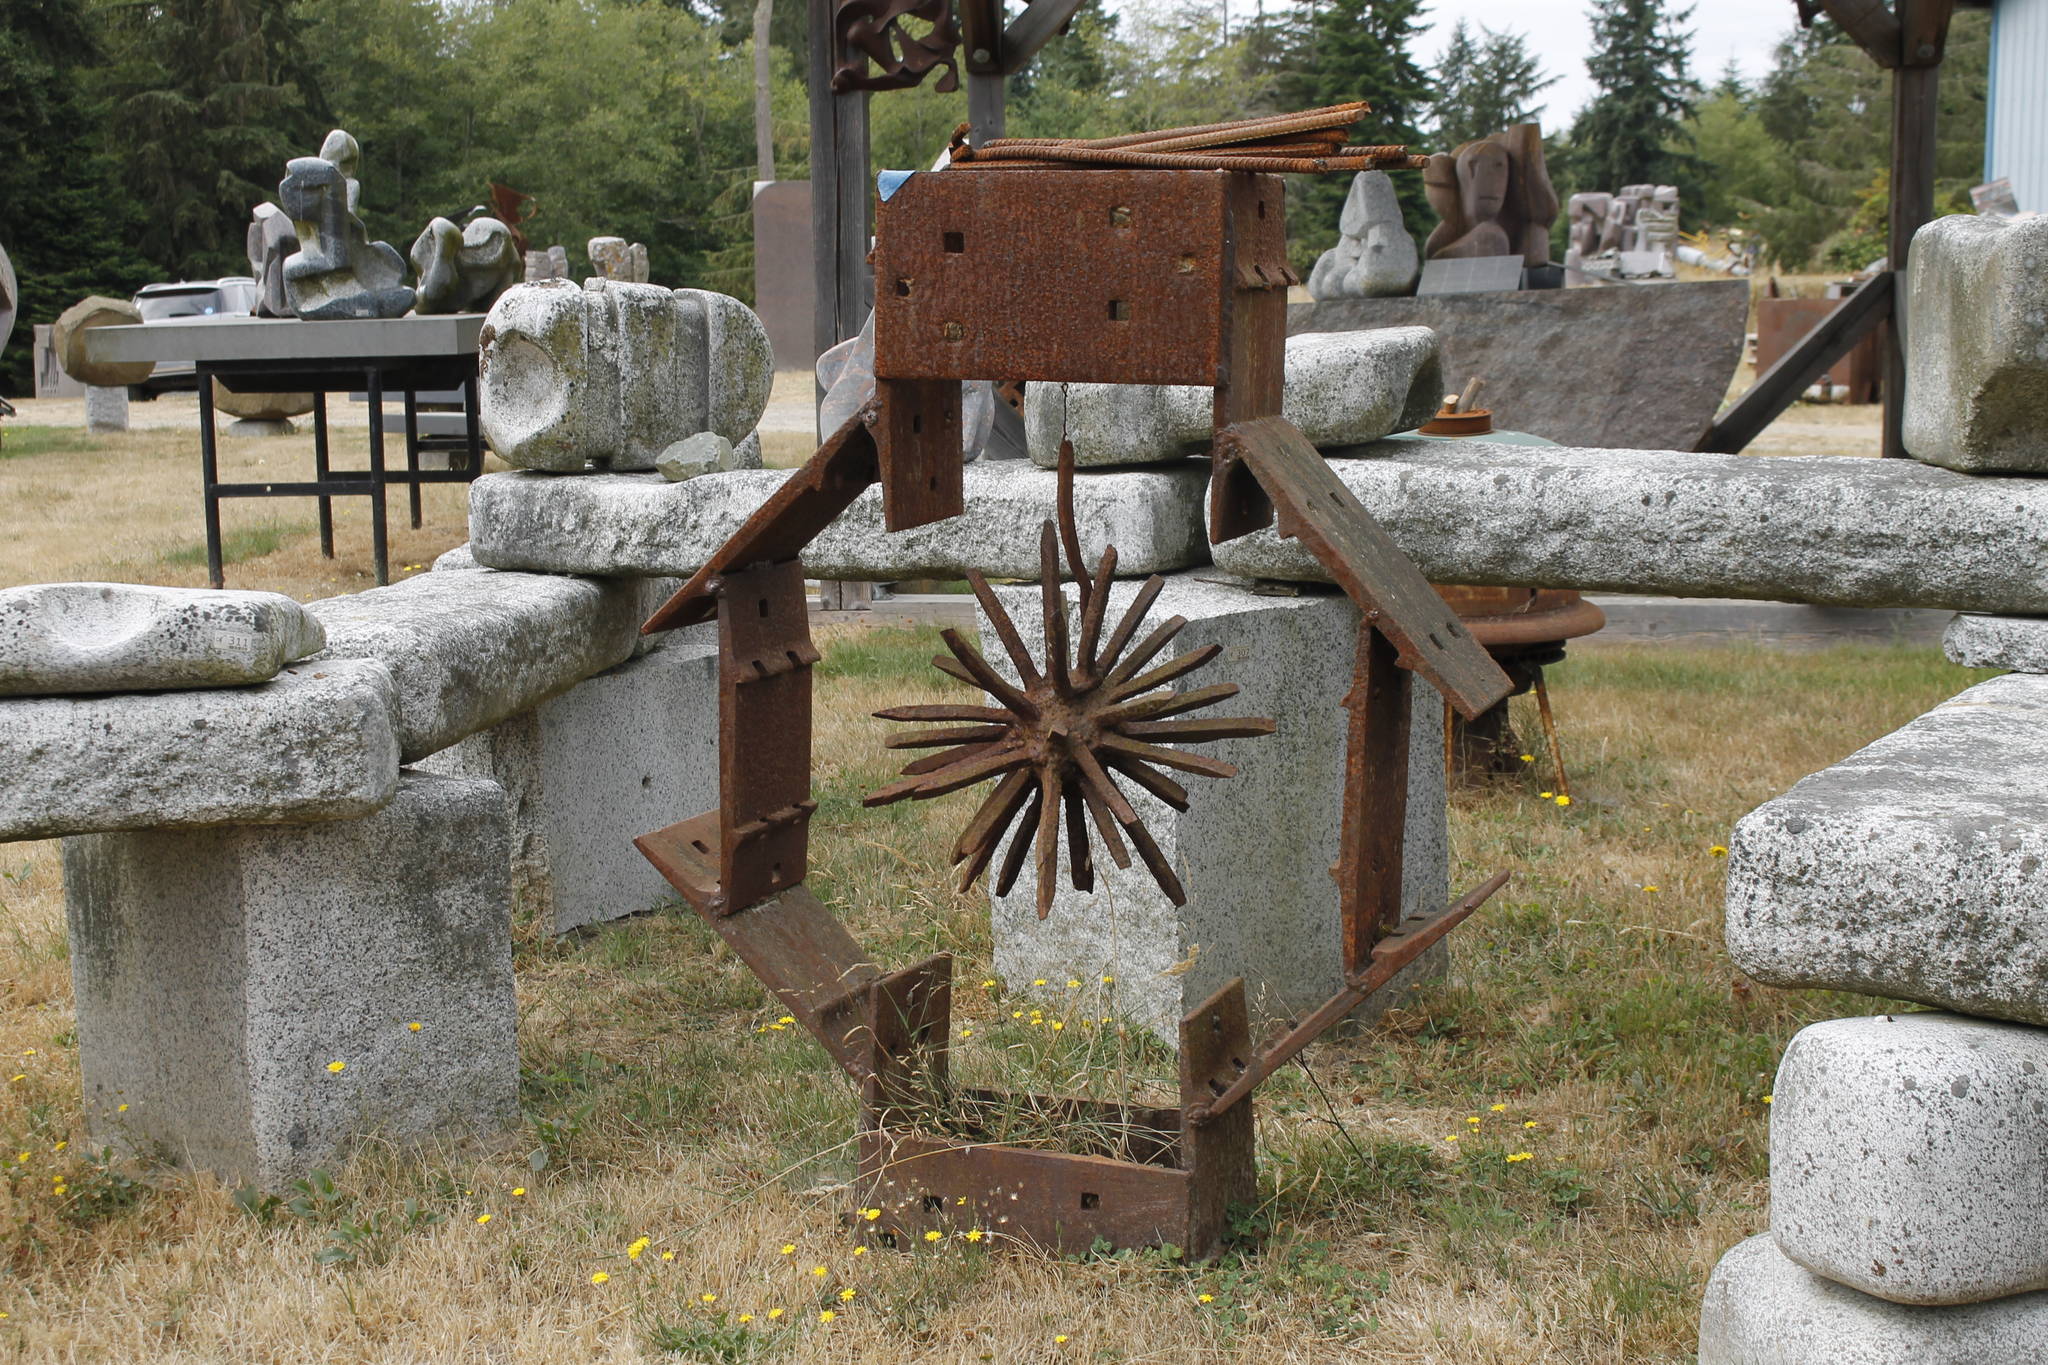 Photo by Kira Erickson/Whidbey News Group
<em>Nelson works with many kinds of mediums, including metal. </em>